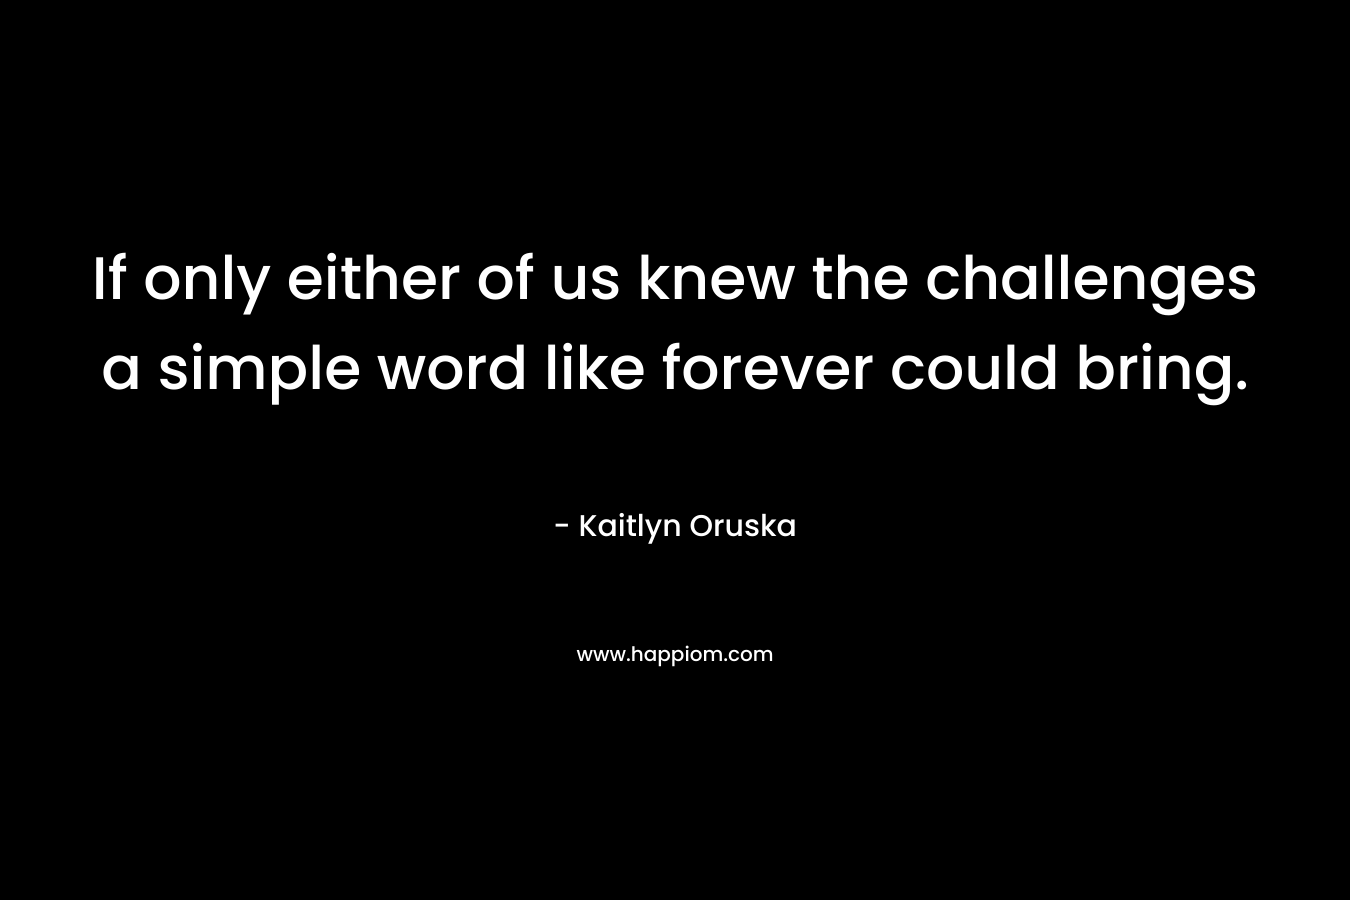 If only either of us knew the challenges a simple word like forever could bring. – Kaitlyn Oruska